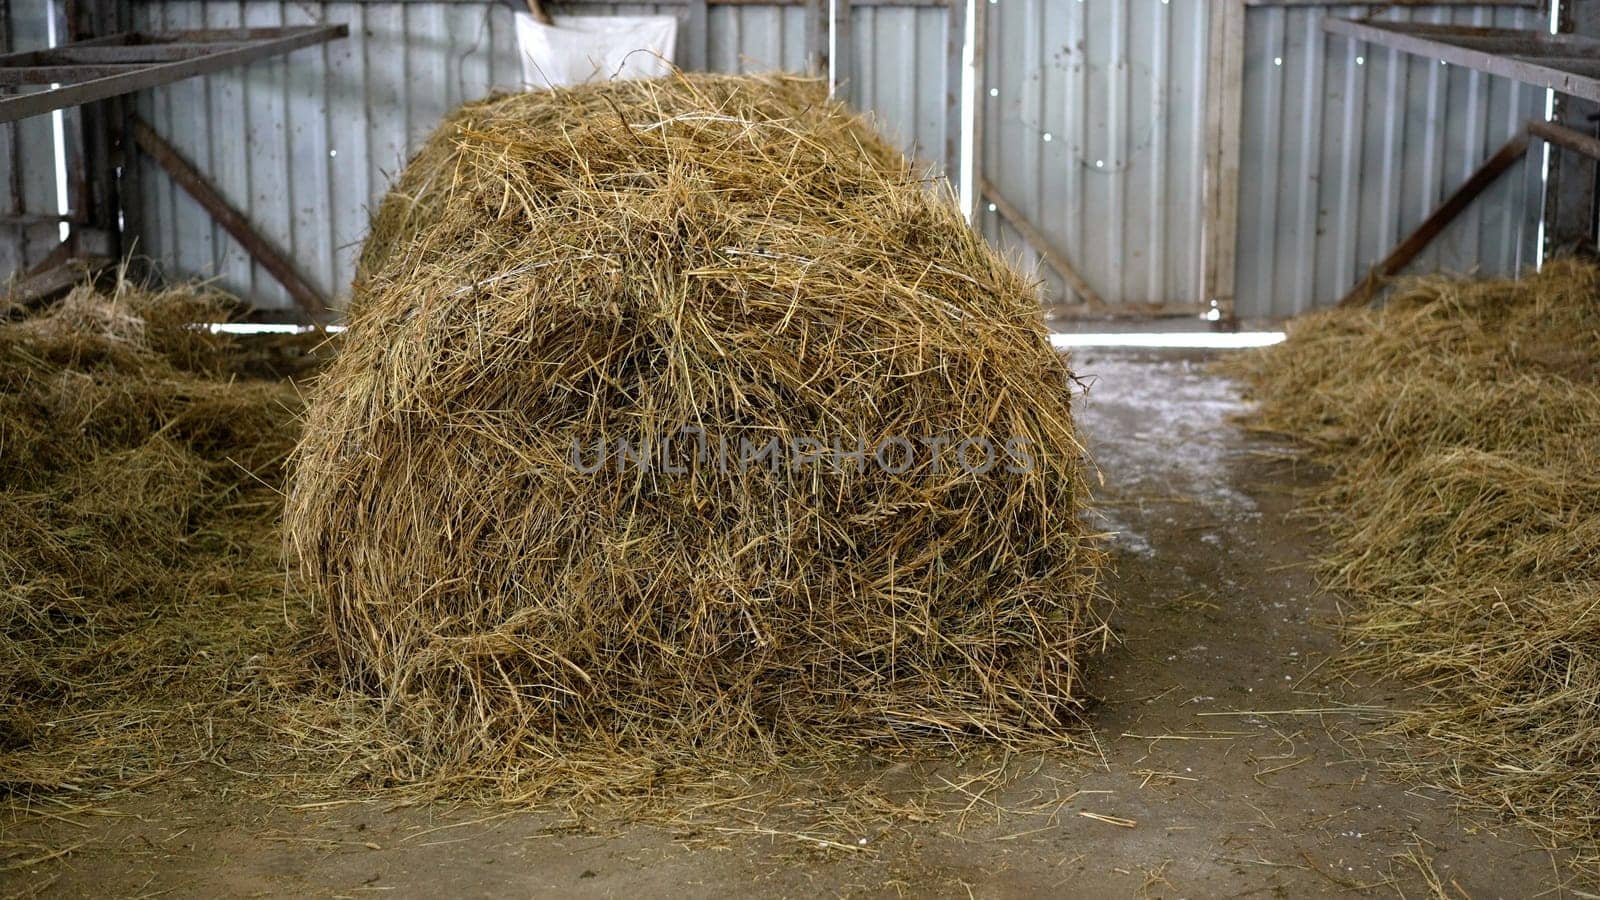 Hay in the barn for winter feeding. Hay is stored on a farm for agriculture, livestock feed, ranch or farm use. Straw for animals to eat in winter. by Rusrussid